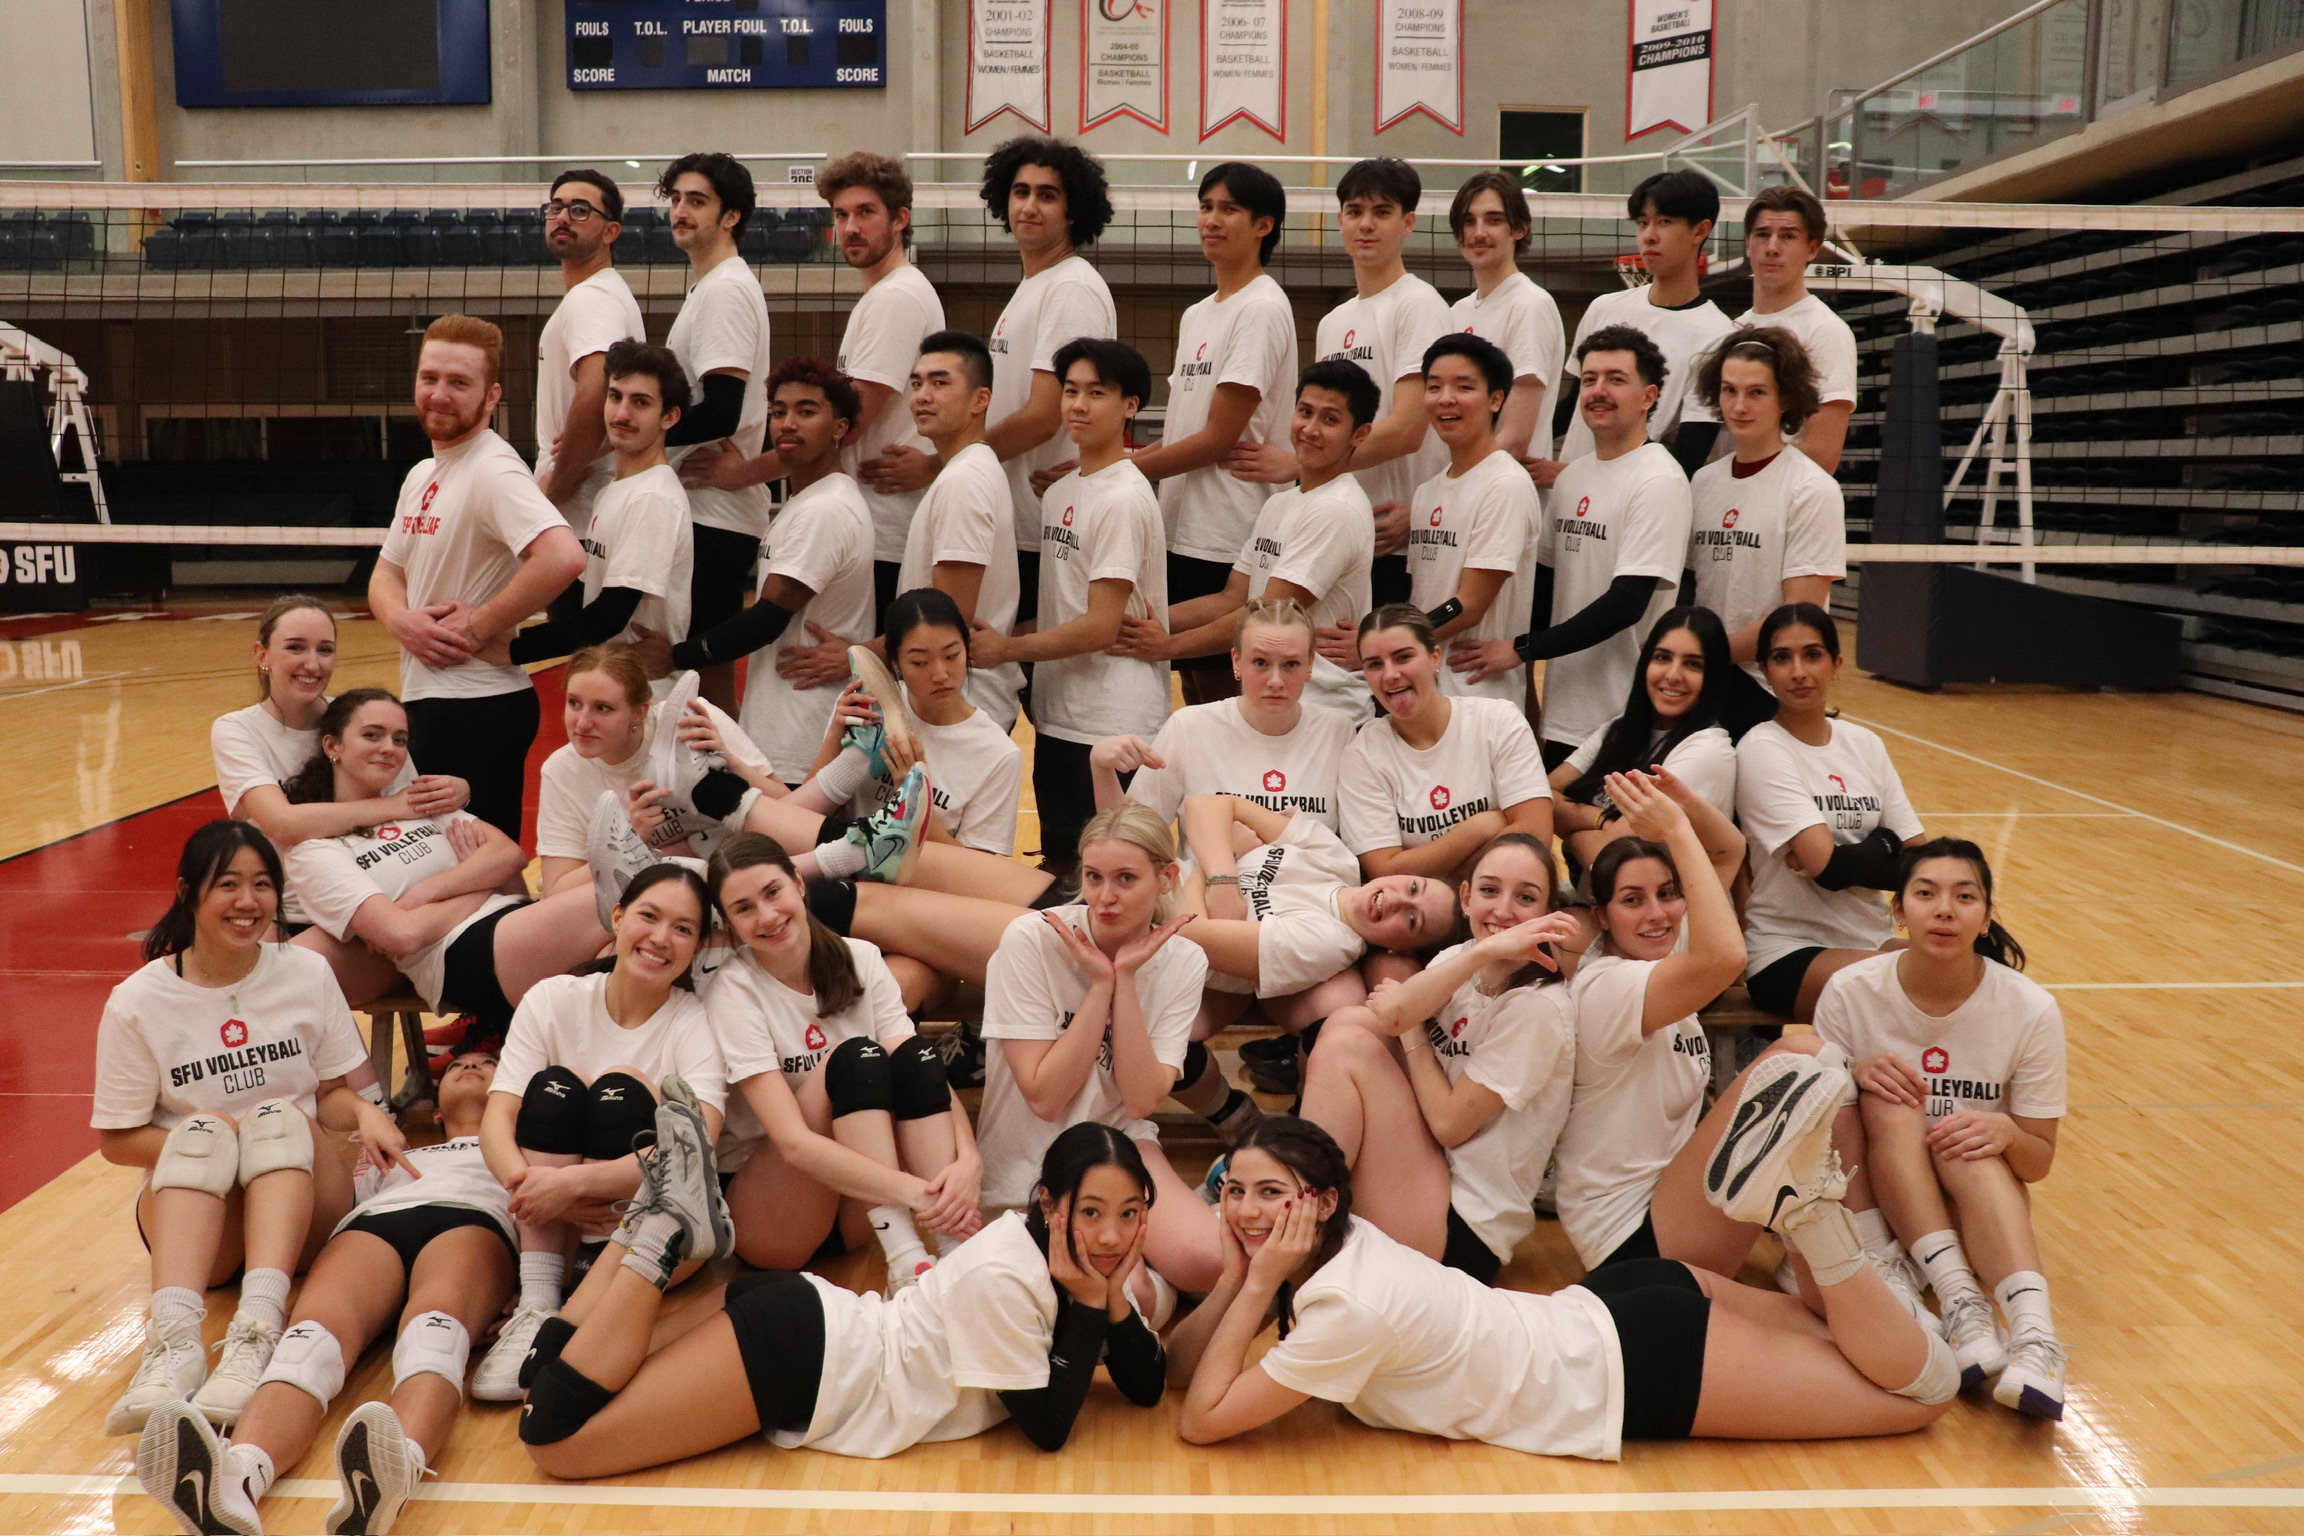 team photo of the SFU volleyball club posed in rows in front of the volleyball net